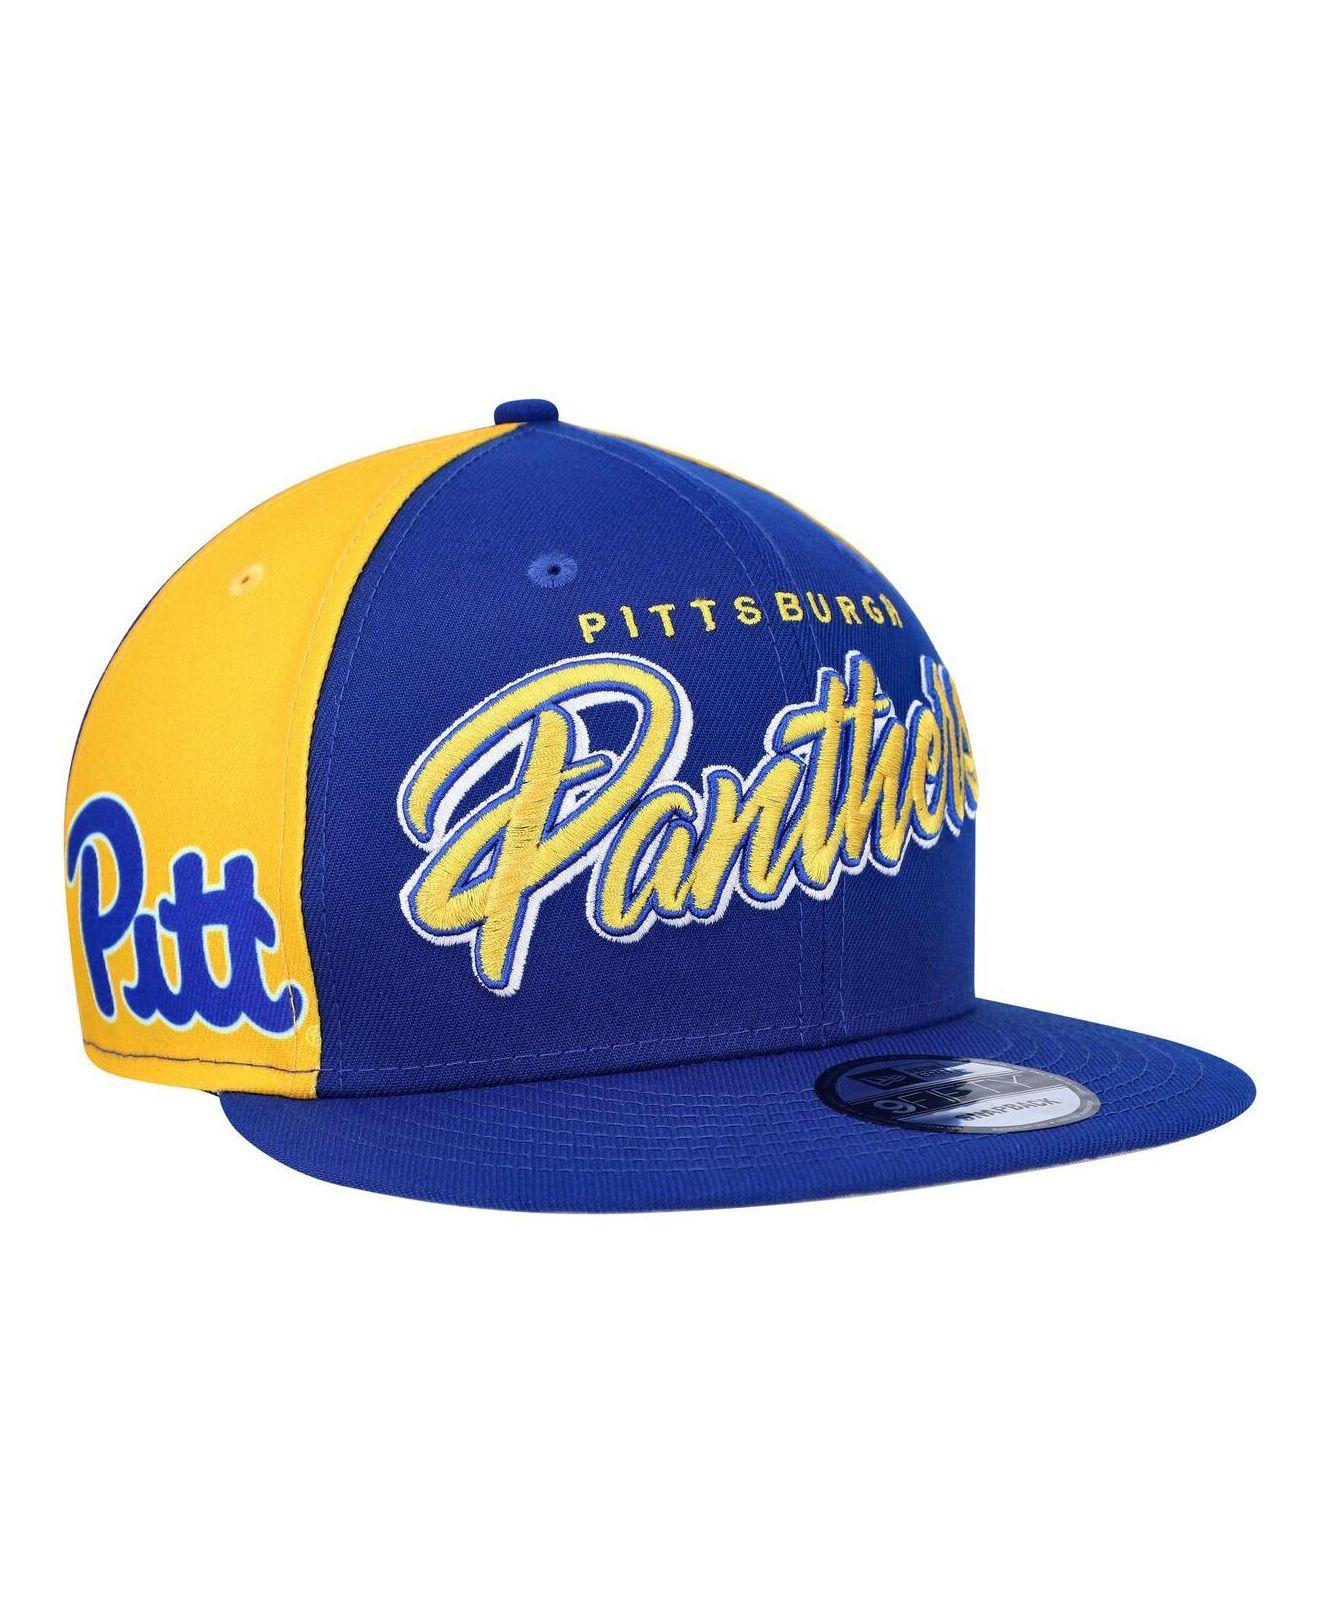 KTZ Royal Pitt Panthers Outright 9fifty Snapback Hat in Blue for Men